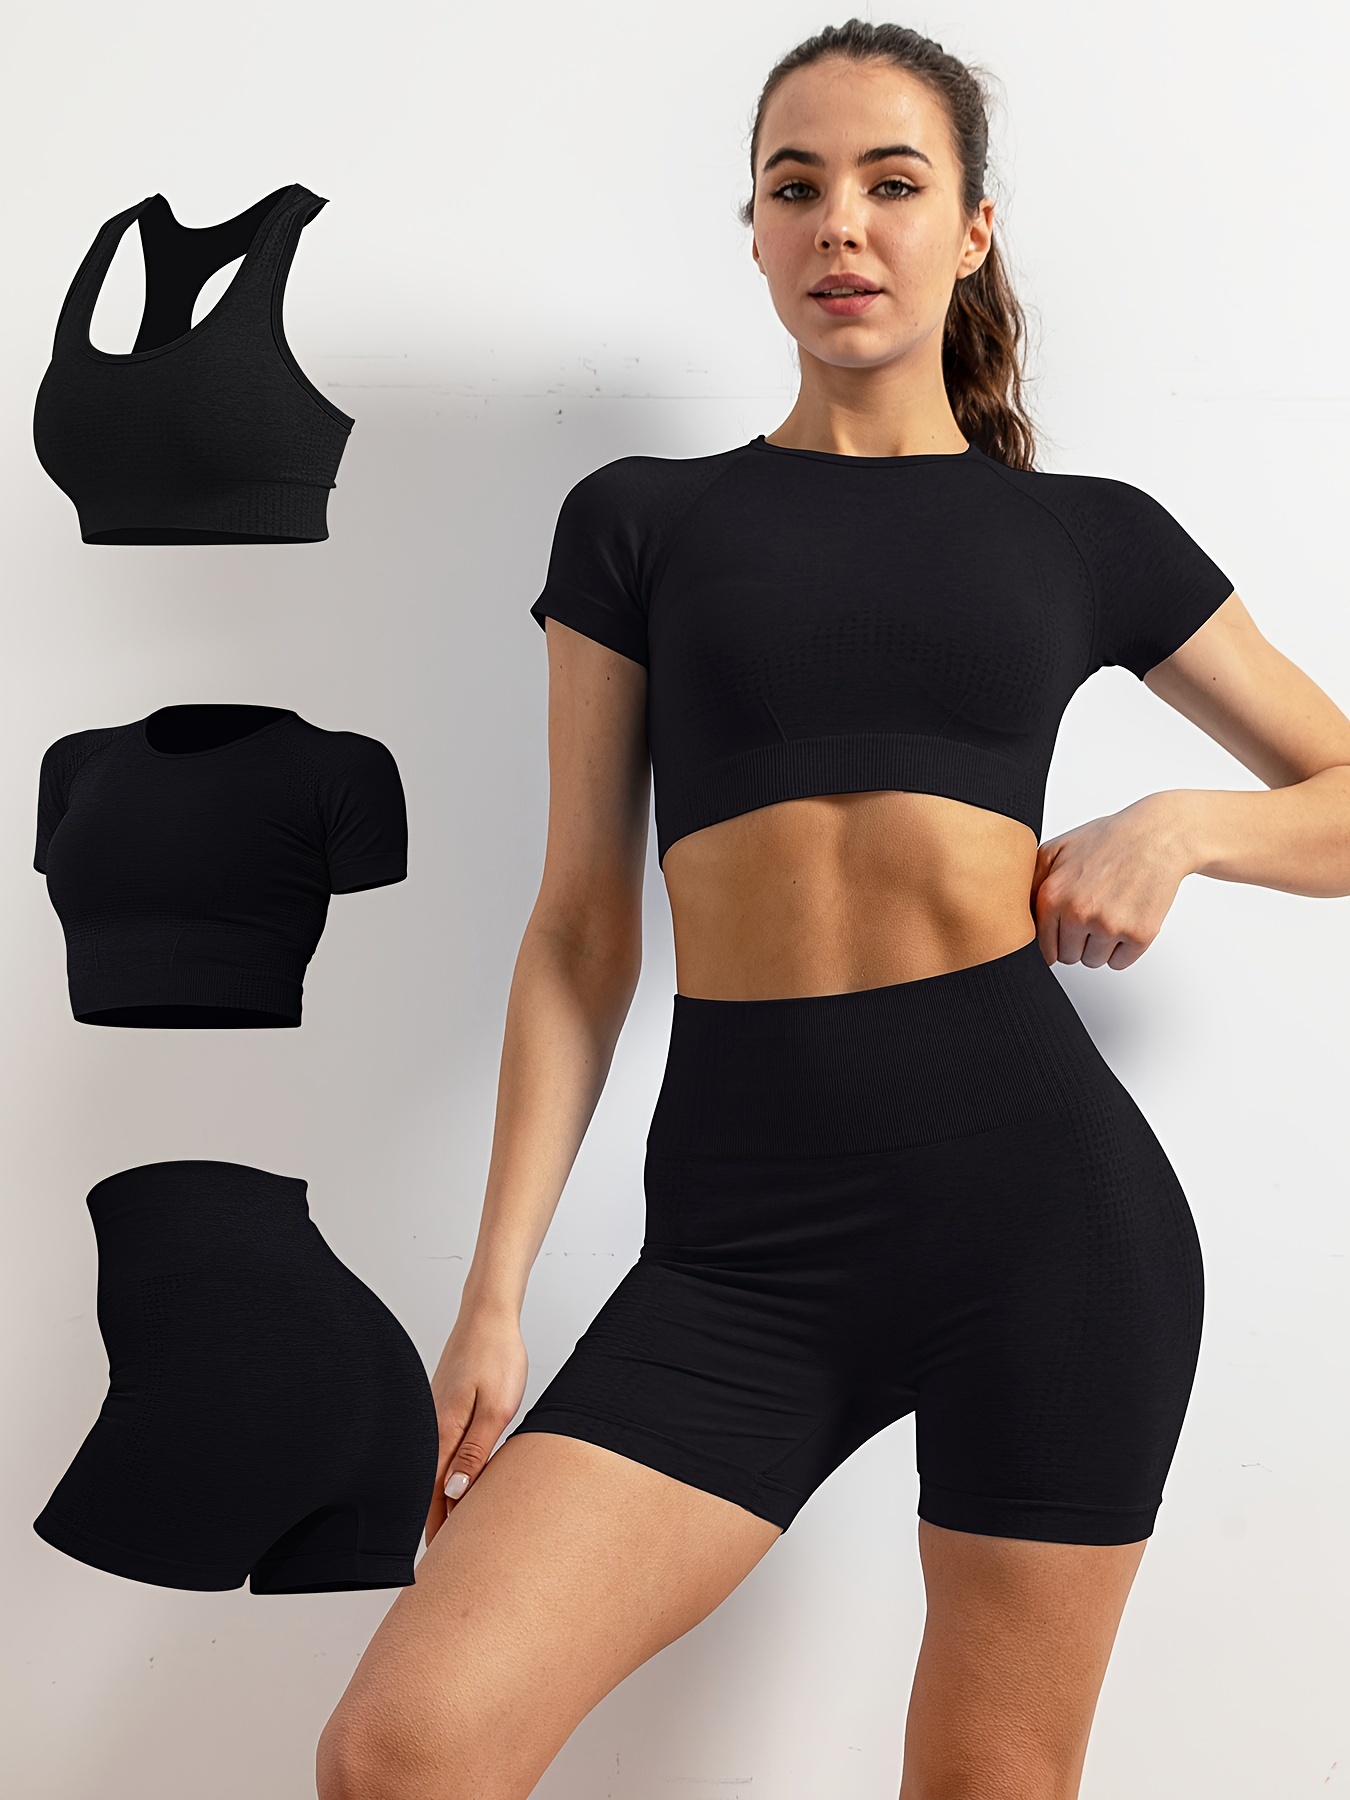 Women Gym Clothes Sports Set Black Short Sleeves Top and full